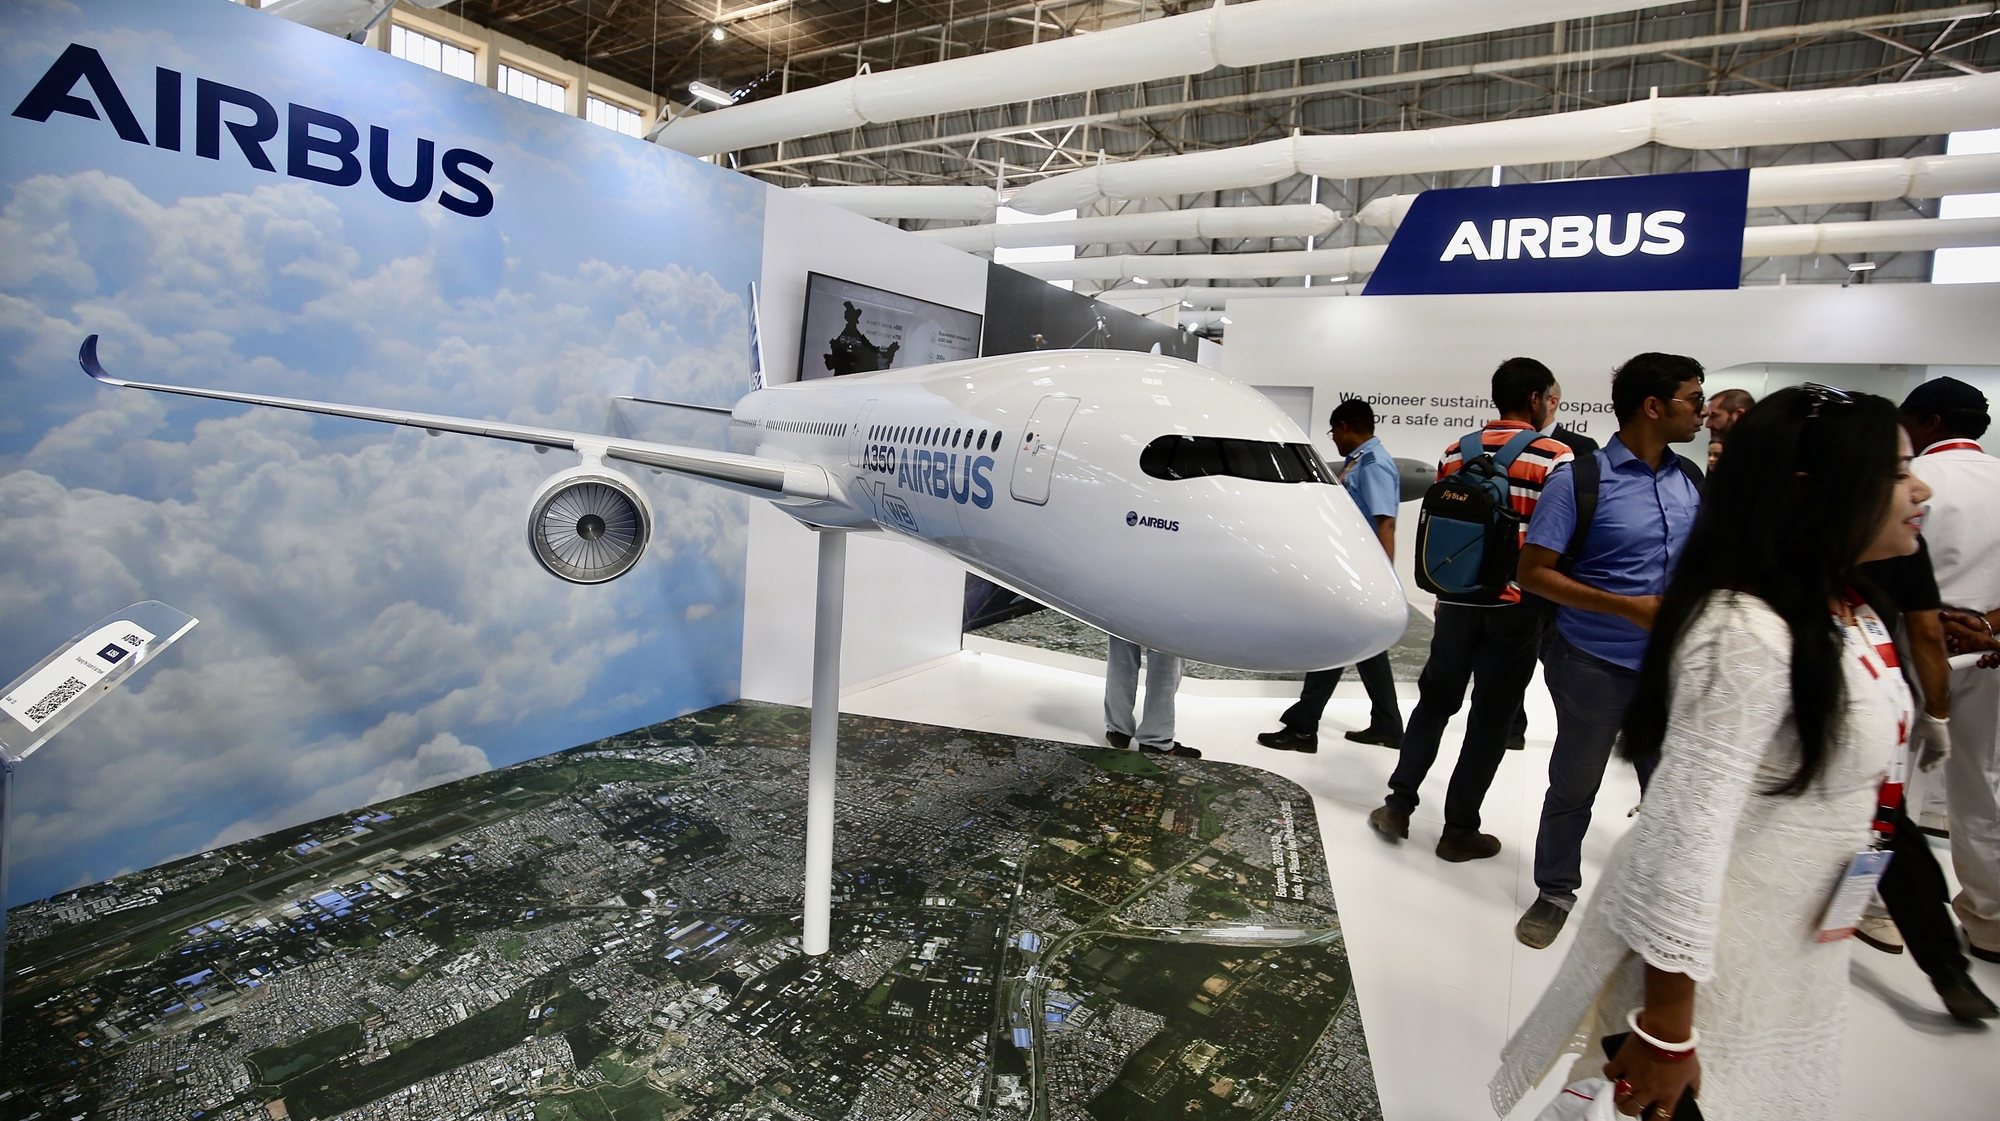 epa10468364 Visitors get information at the &#039;Airbus&#039; exhibition stall during the day-three of the 14th Edition of Aero India 2023, at the Yelahanka Air Force Base, in Bangalore, India, 15 February 2023. More than 800 international defense and aerospace Companies have participated in the Asia’s largest Aero India event which showcases warfare equipment including new fighter planes, next-generation submarines, warships, helicopters, missiles, howitzers, air defense systems, assault weapons and all kind of military gear from 13 to 17 February 2023.  EPA/JAGADEESH NV